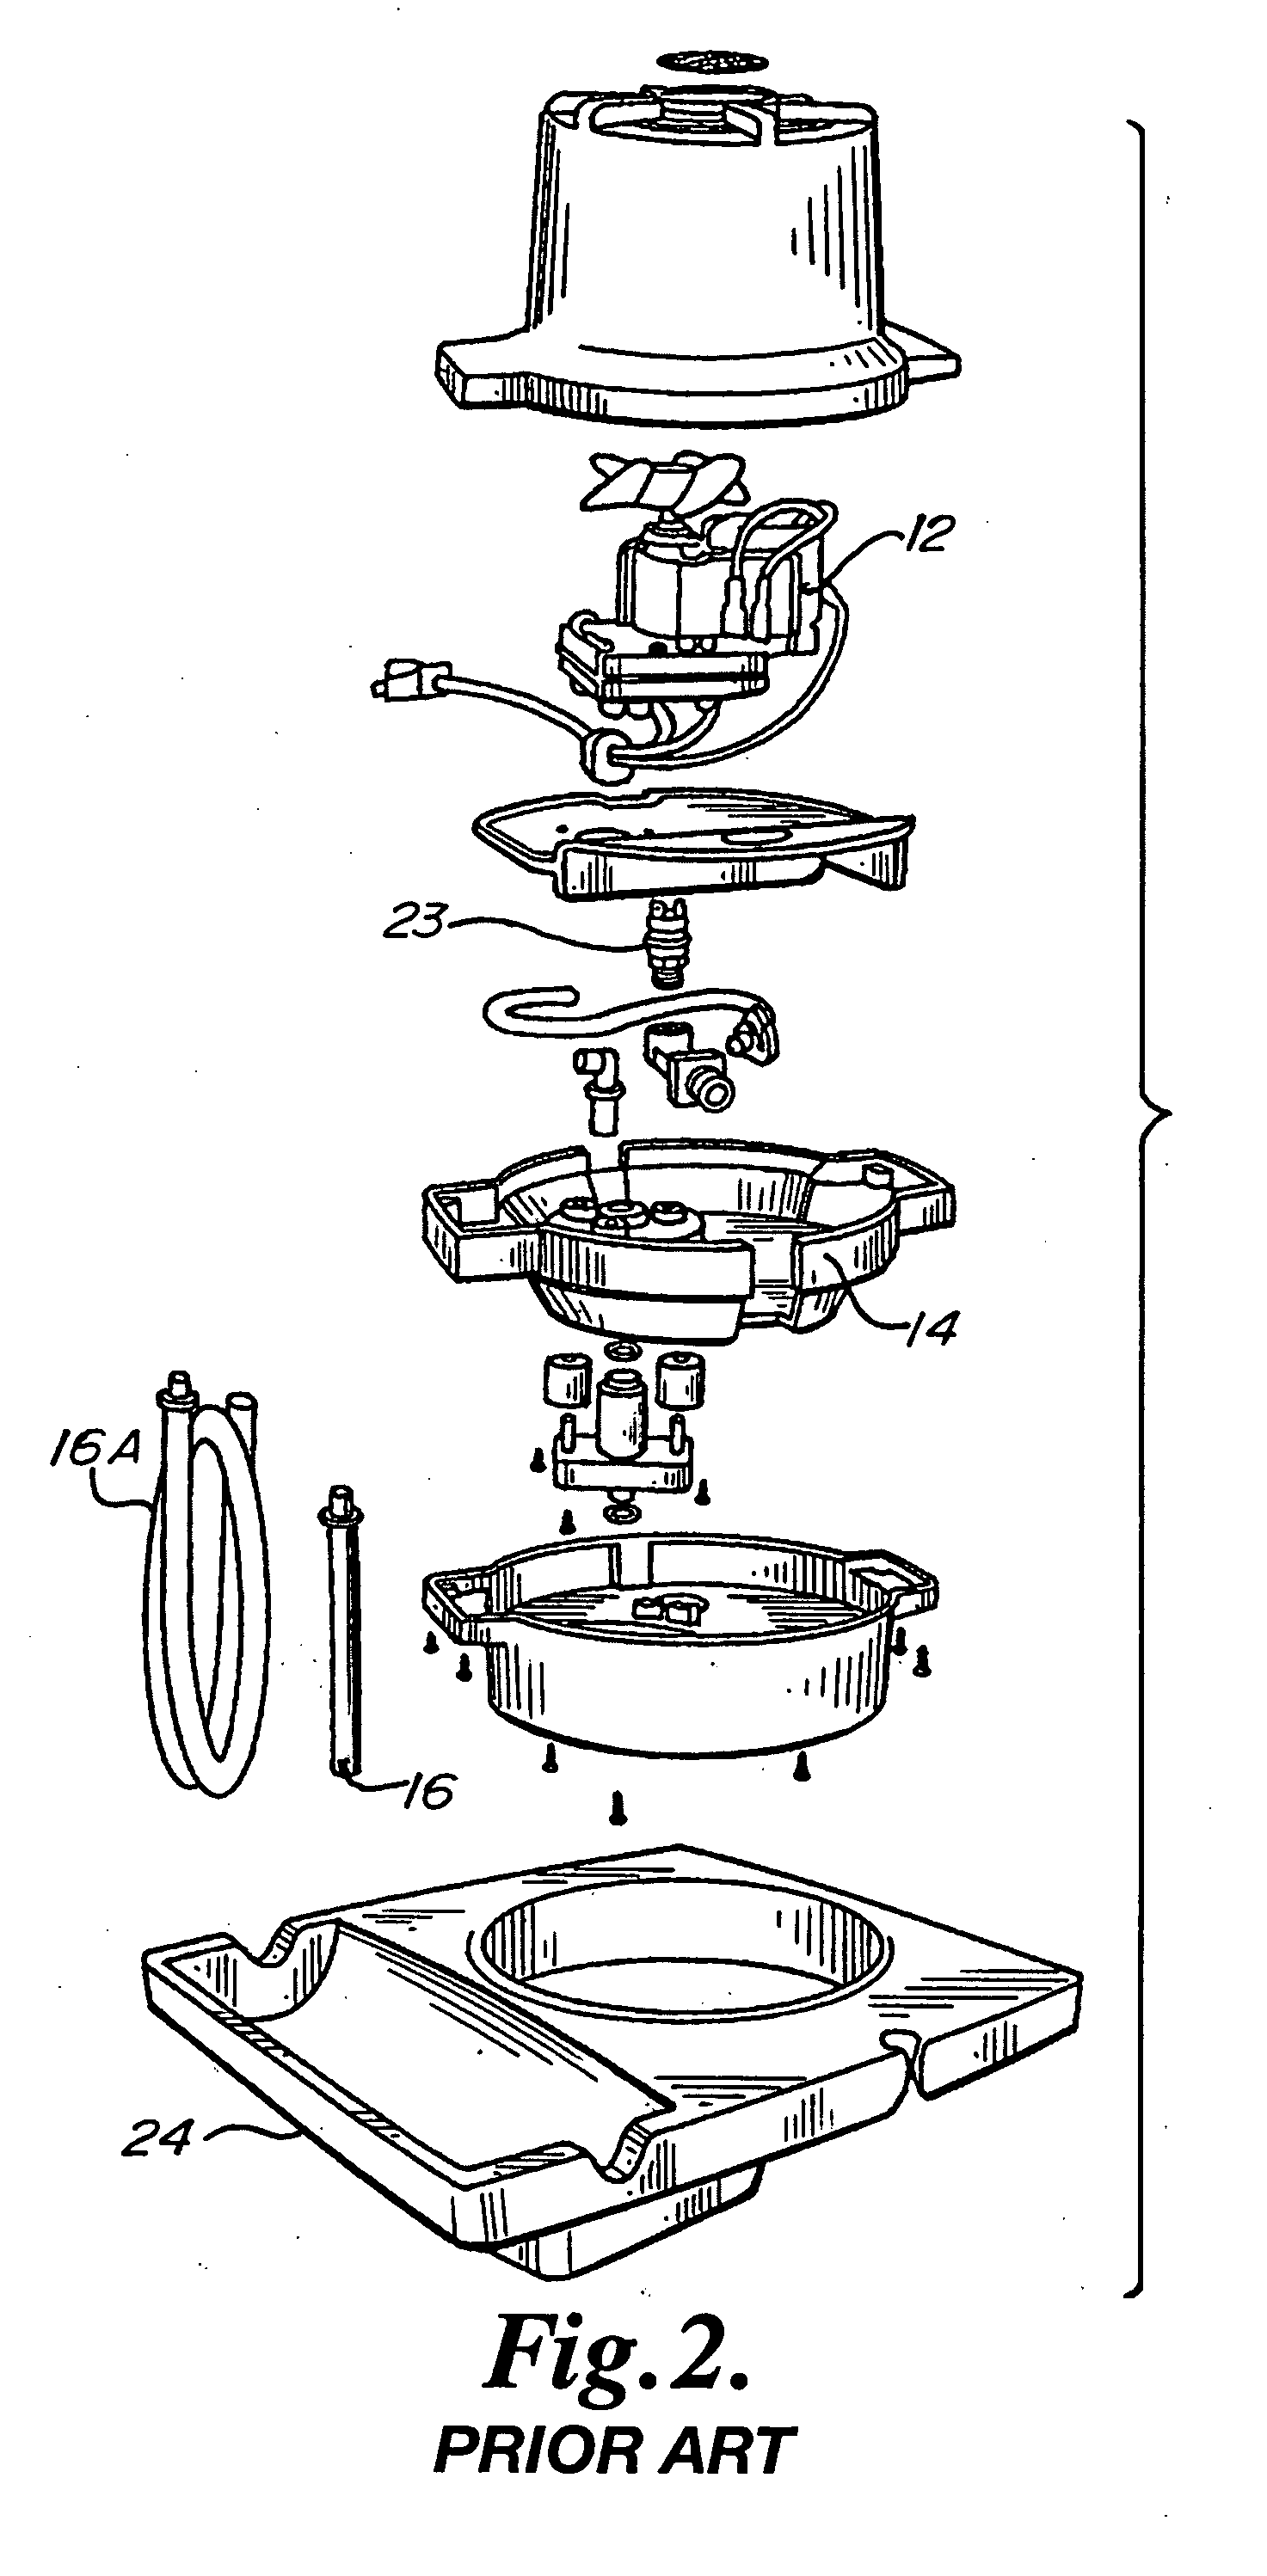 Reversible electric pump and paint roller assembly